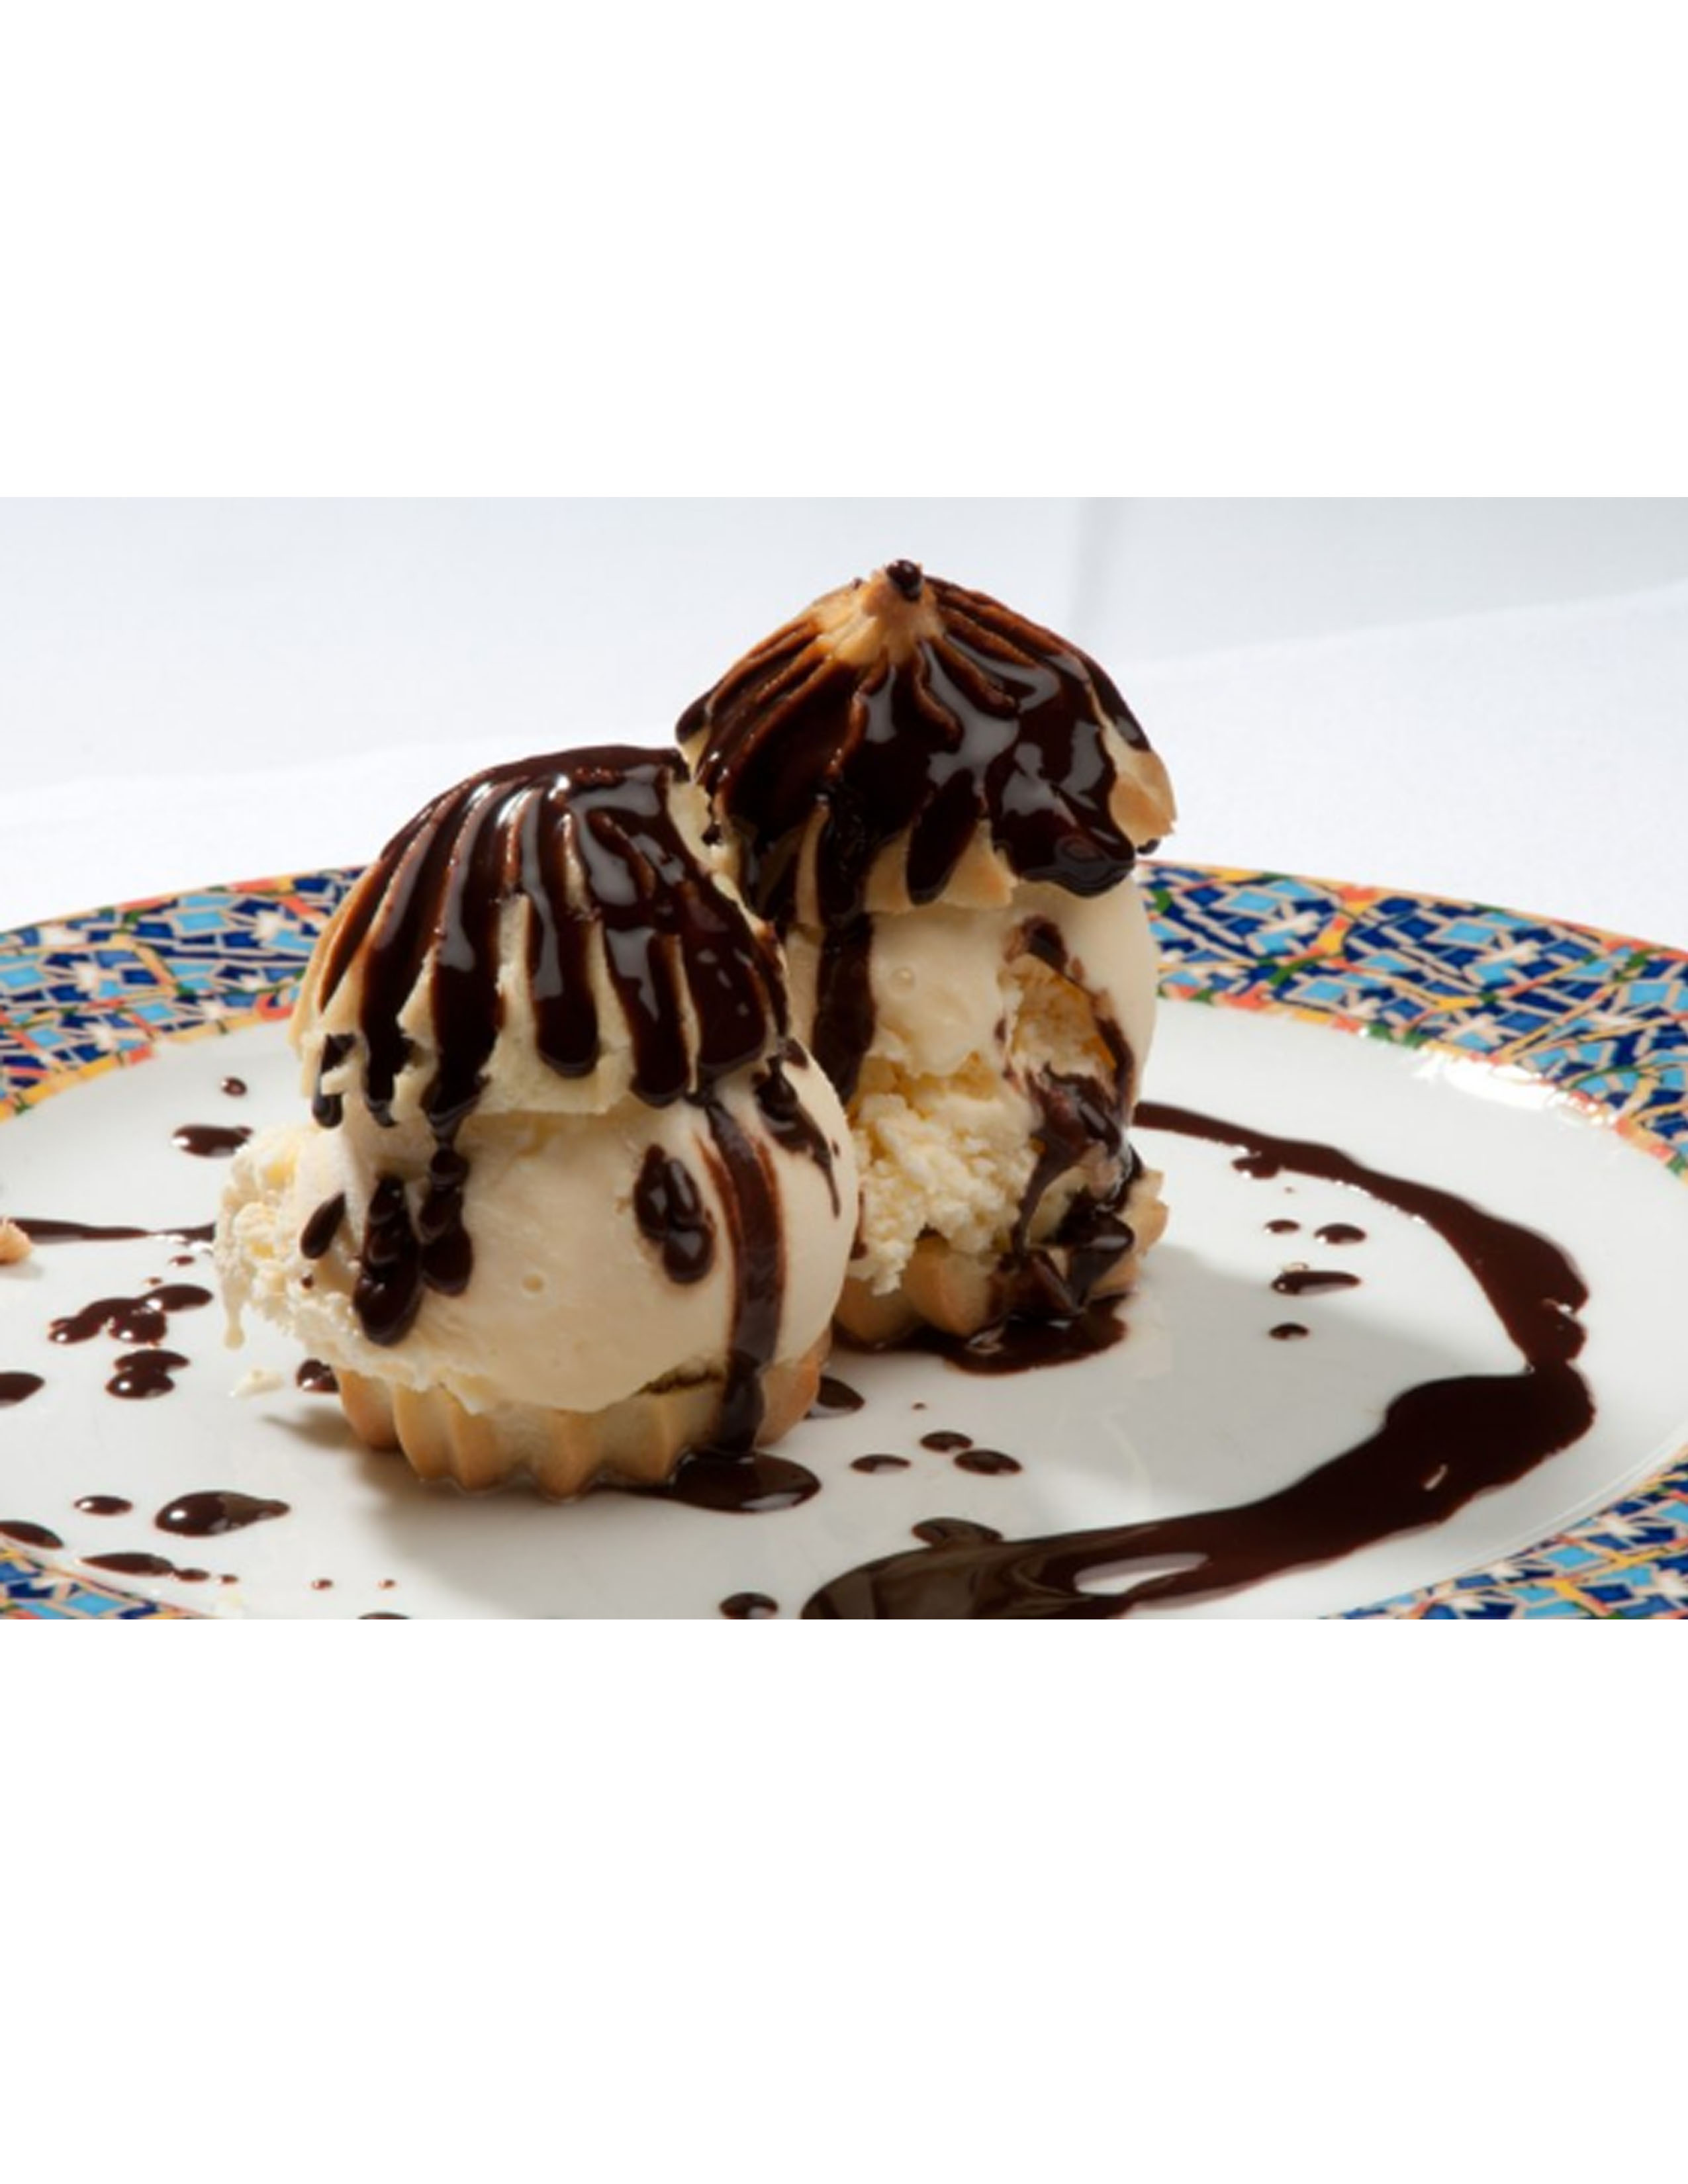 Day 6: A Celebration of Chocolate – Profiteroles from Cafe Prima Pasta